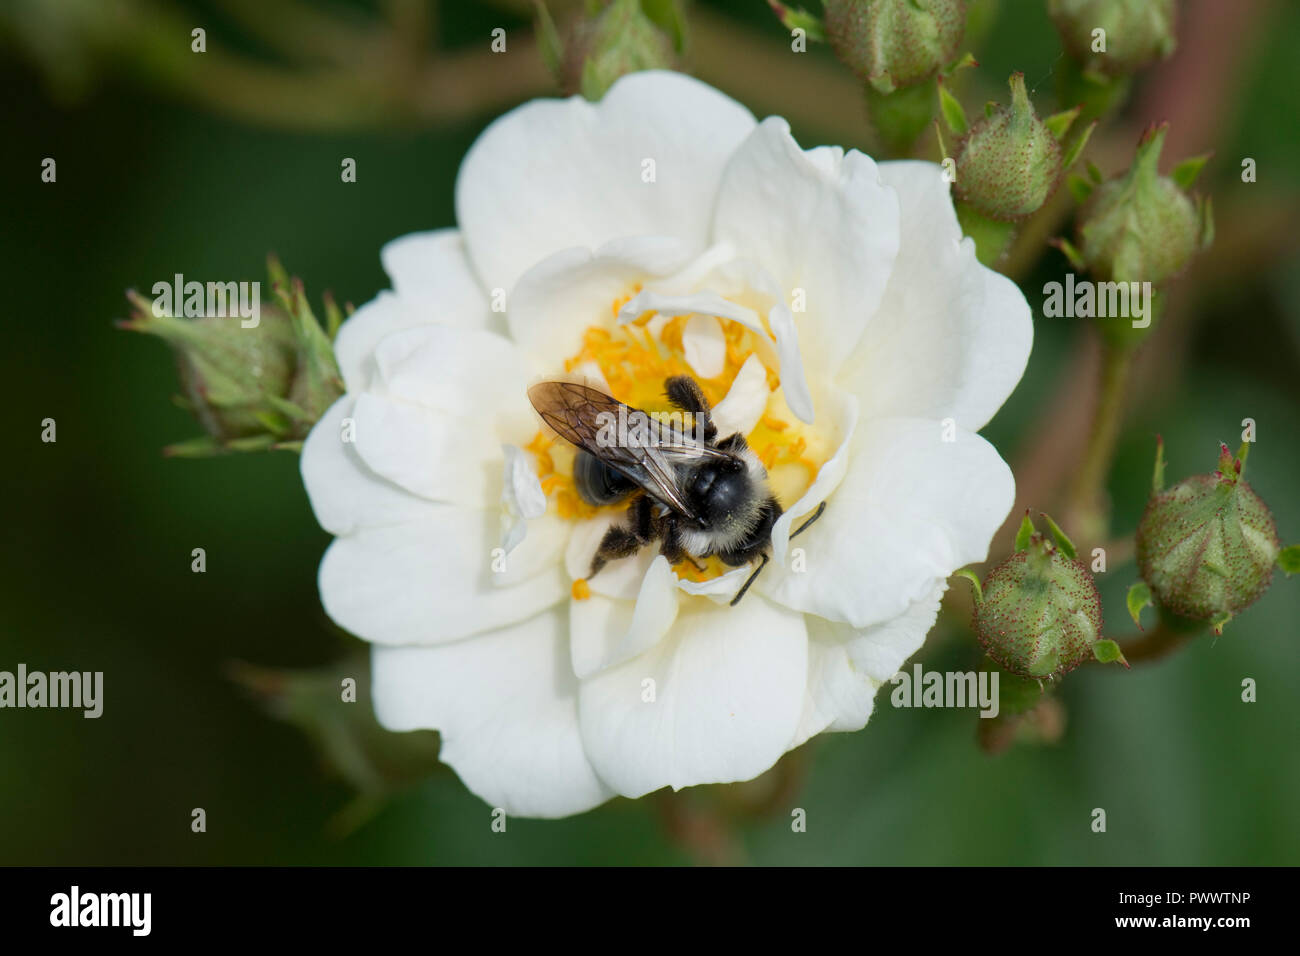 A female ashy mining bee, Andrena cineraria, landing on the white flower of a rose 'Rambling Rector', a summer pollinator, June Stock Photo